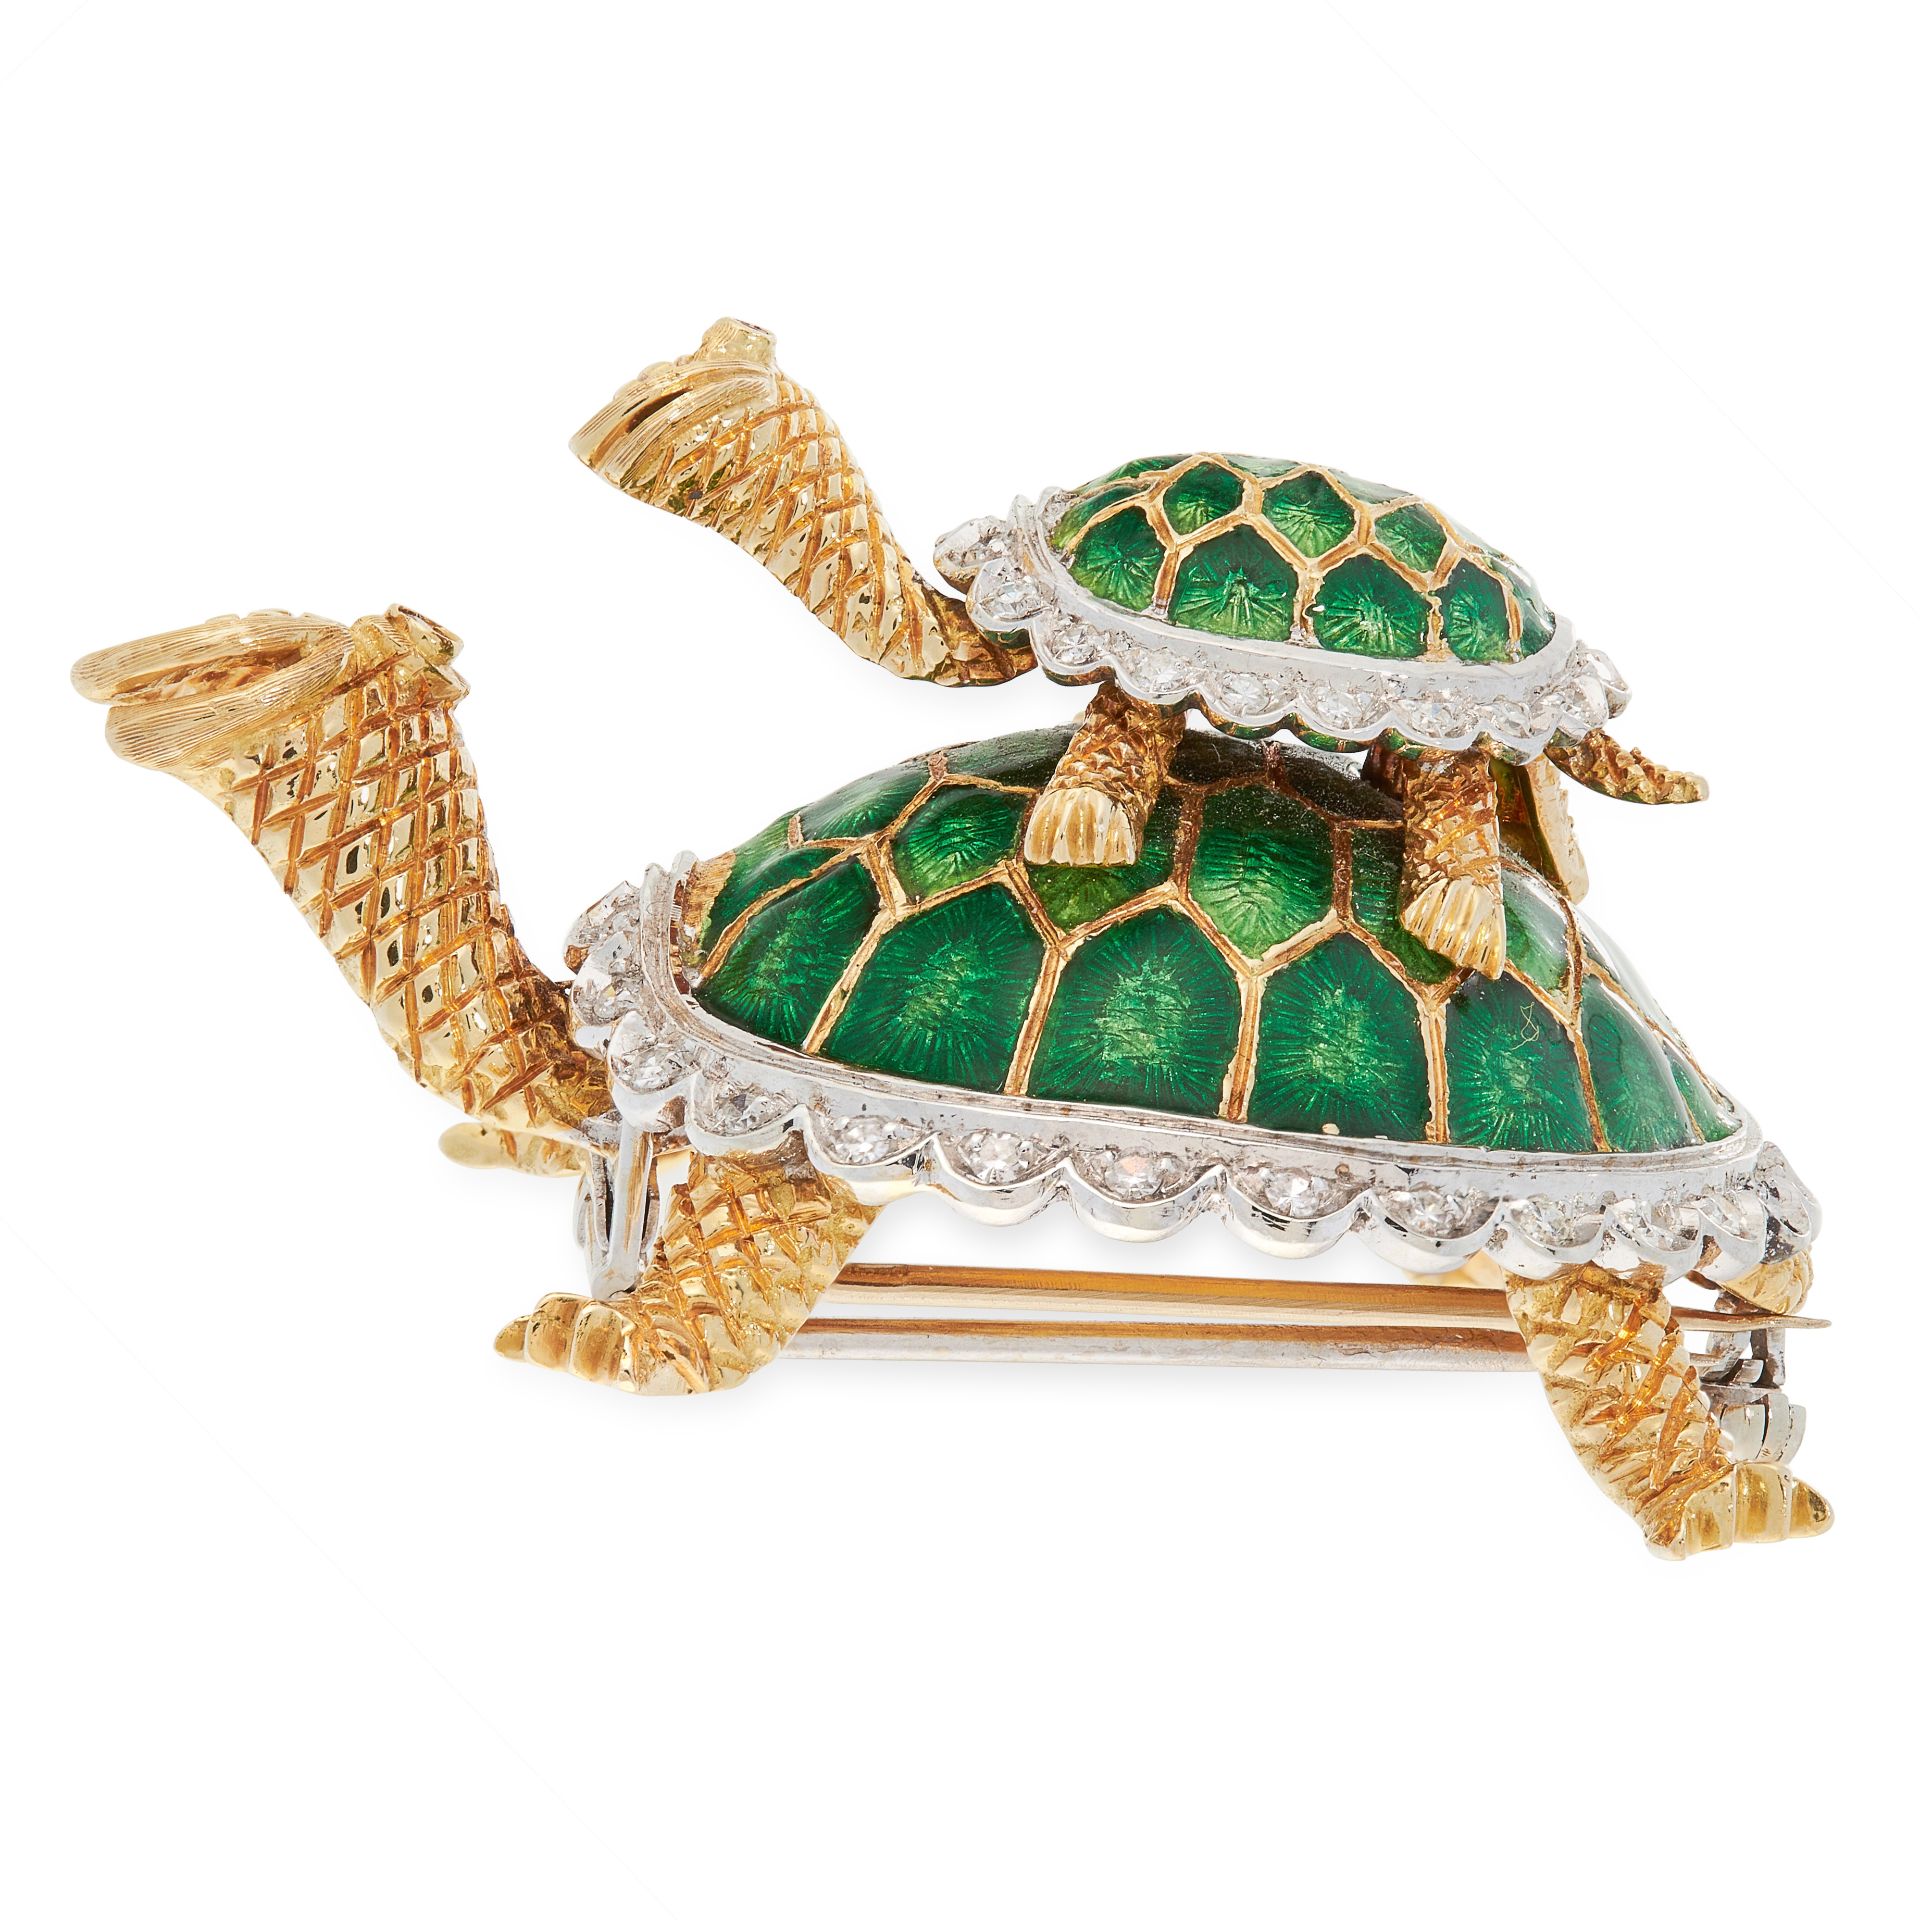 A VINTAGE DIAMOND, RUBY AND ENAMEL TORTOISE BROOCH in 18ct yellow and white gold, designed as a